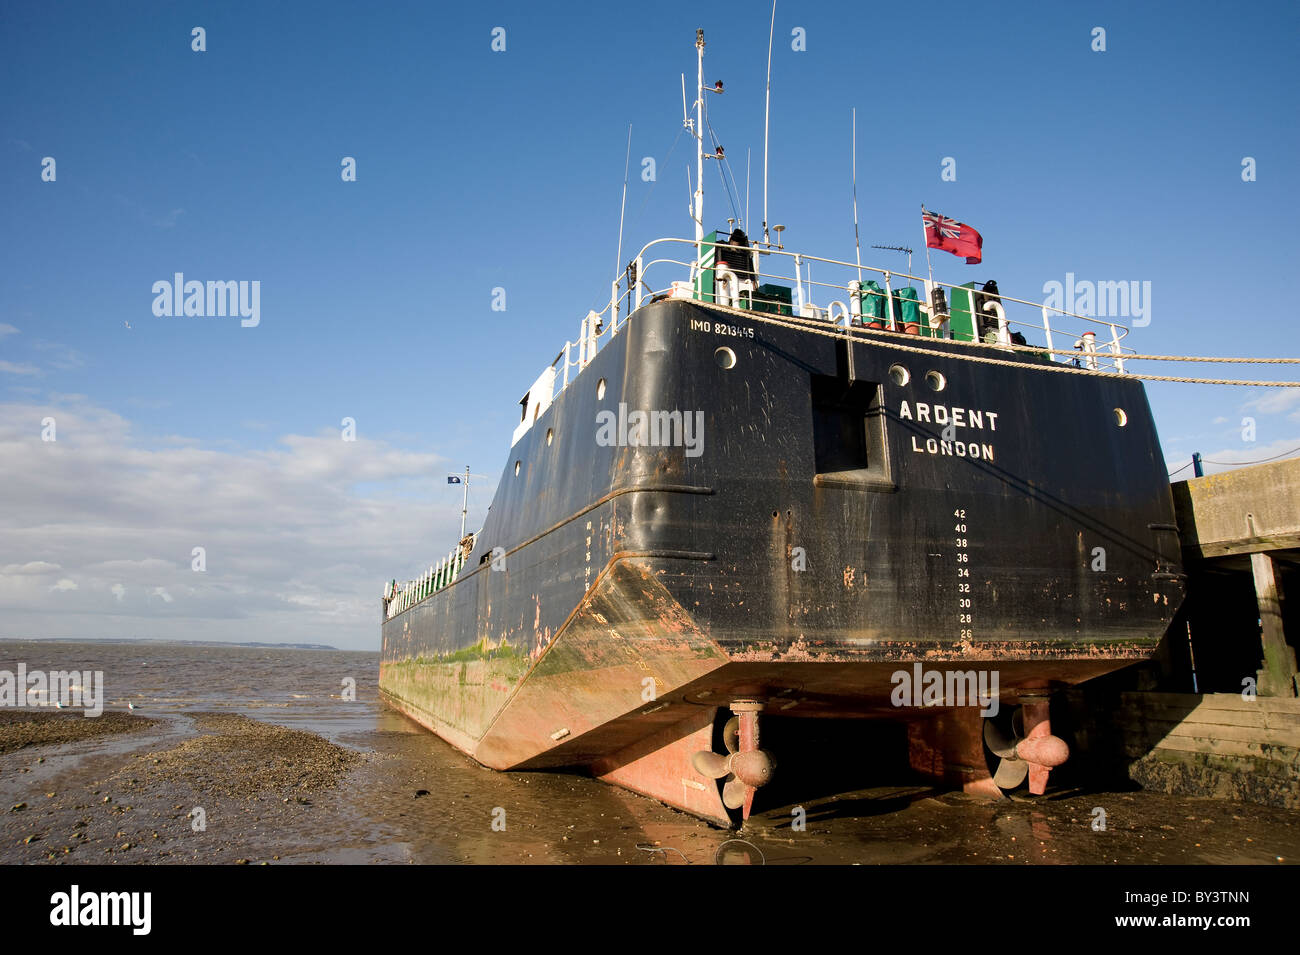 Ardent London freighter beached at low tide Stock Photo